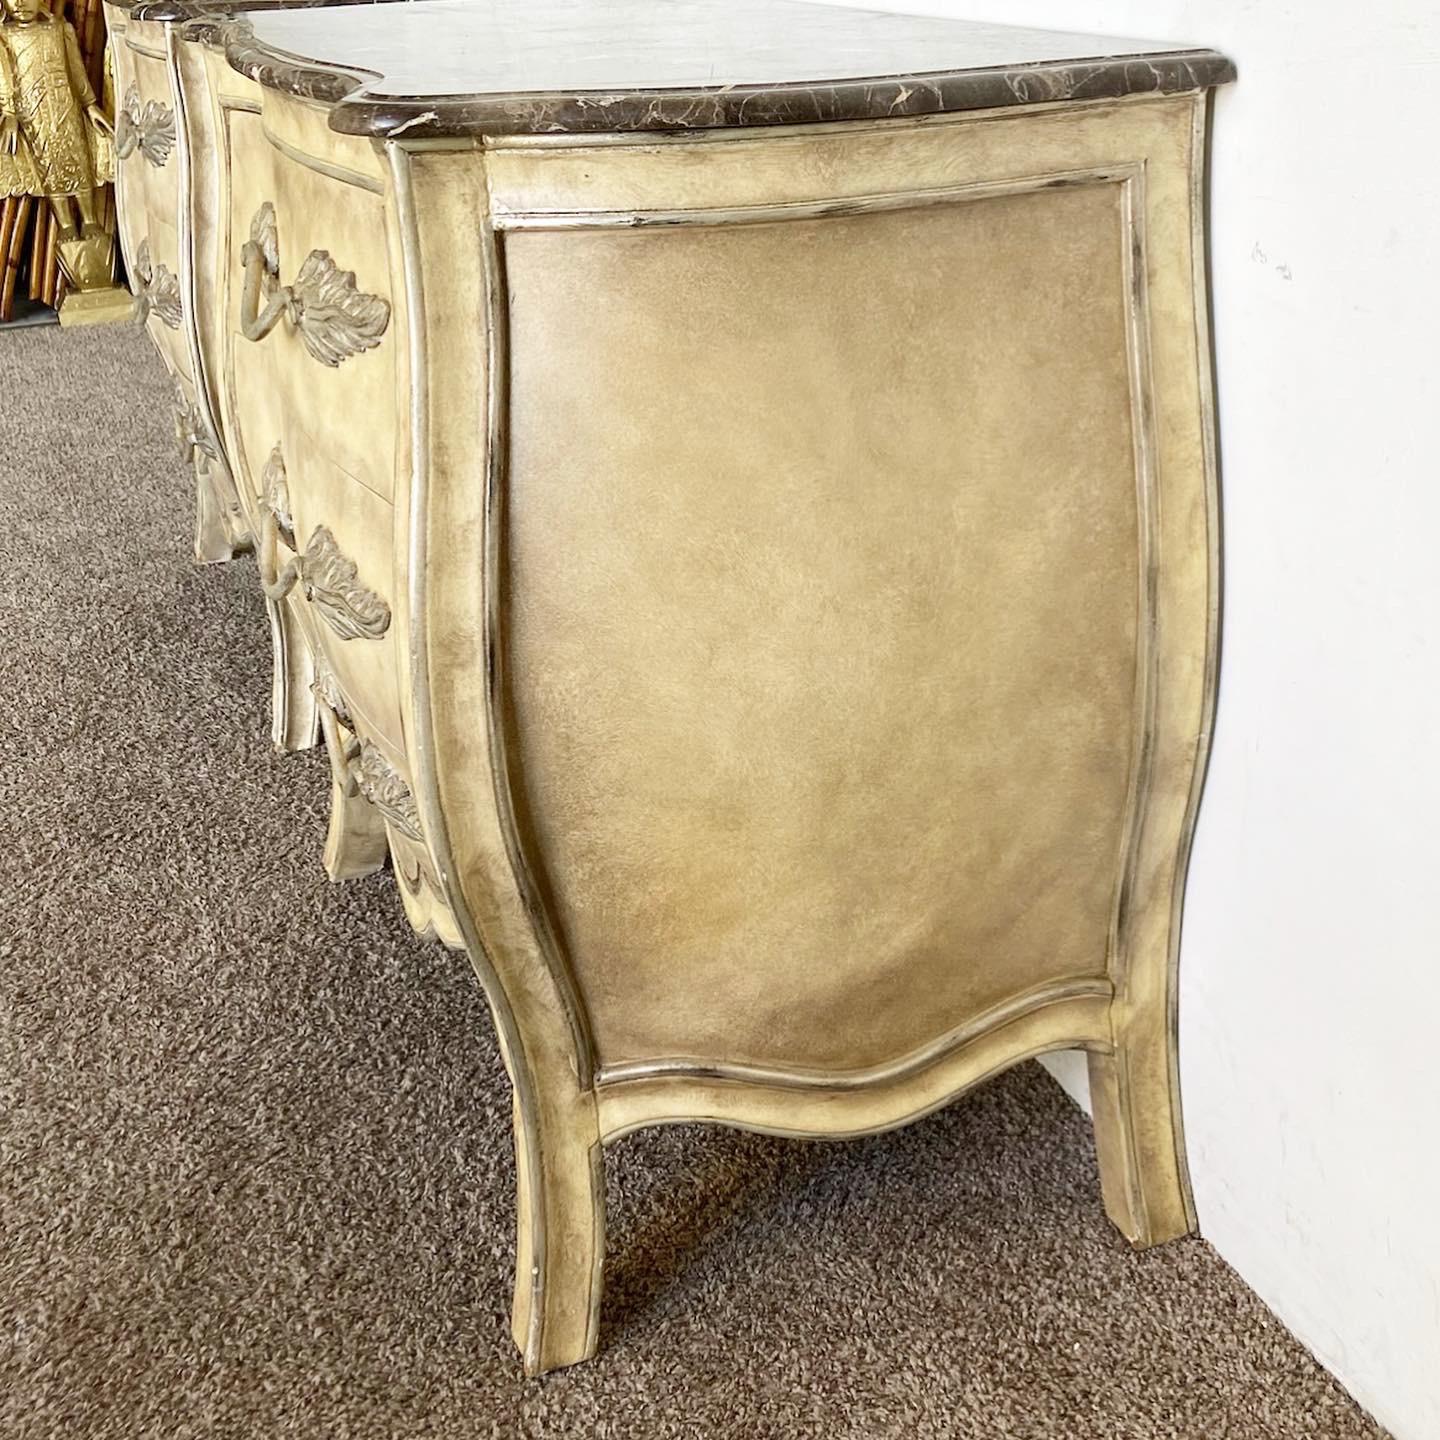 20th Century French Provincial Marble Top Bombé Commodes/Nightstands - a Pair